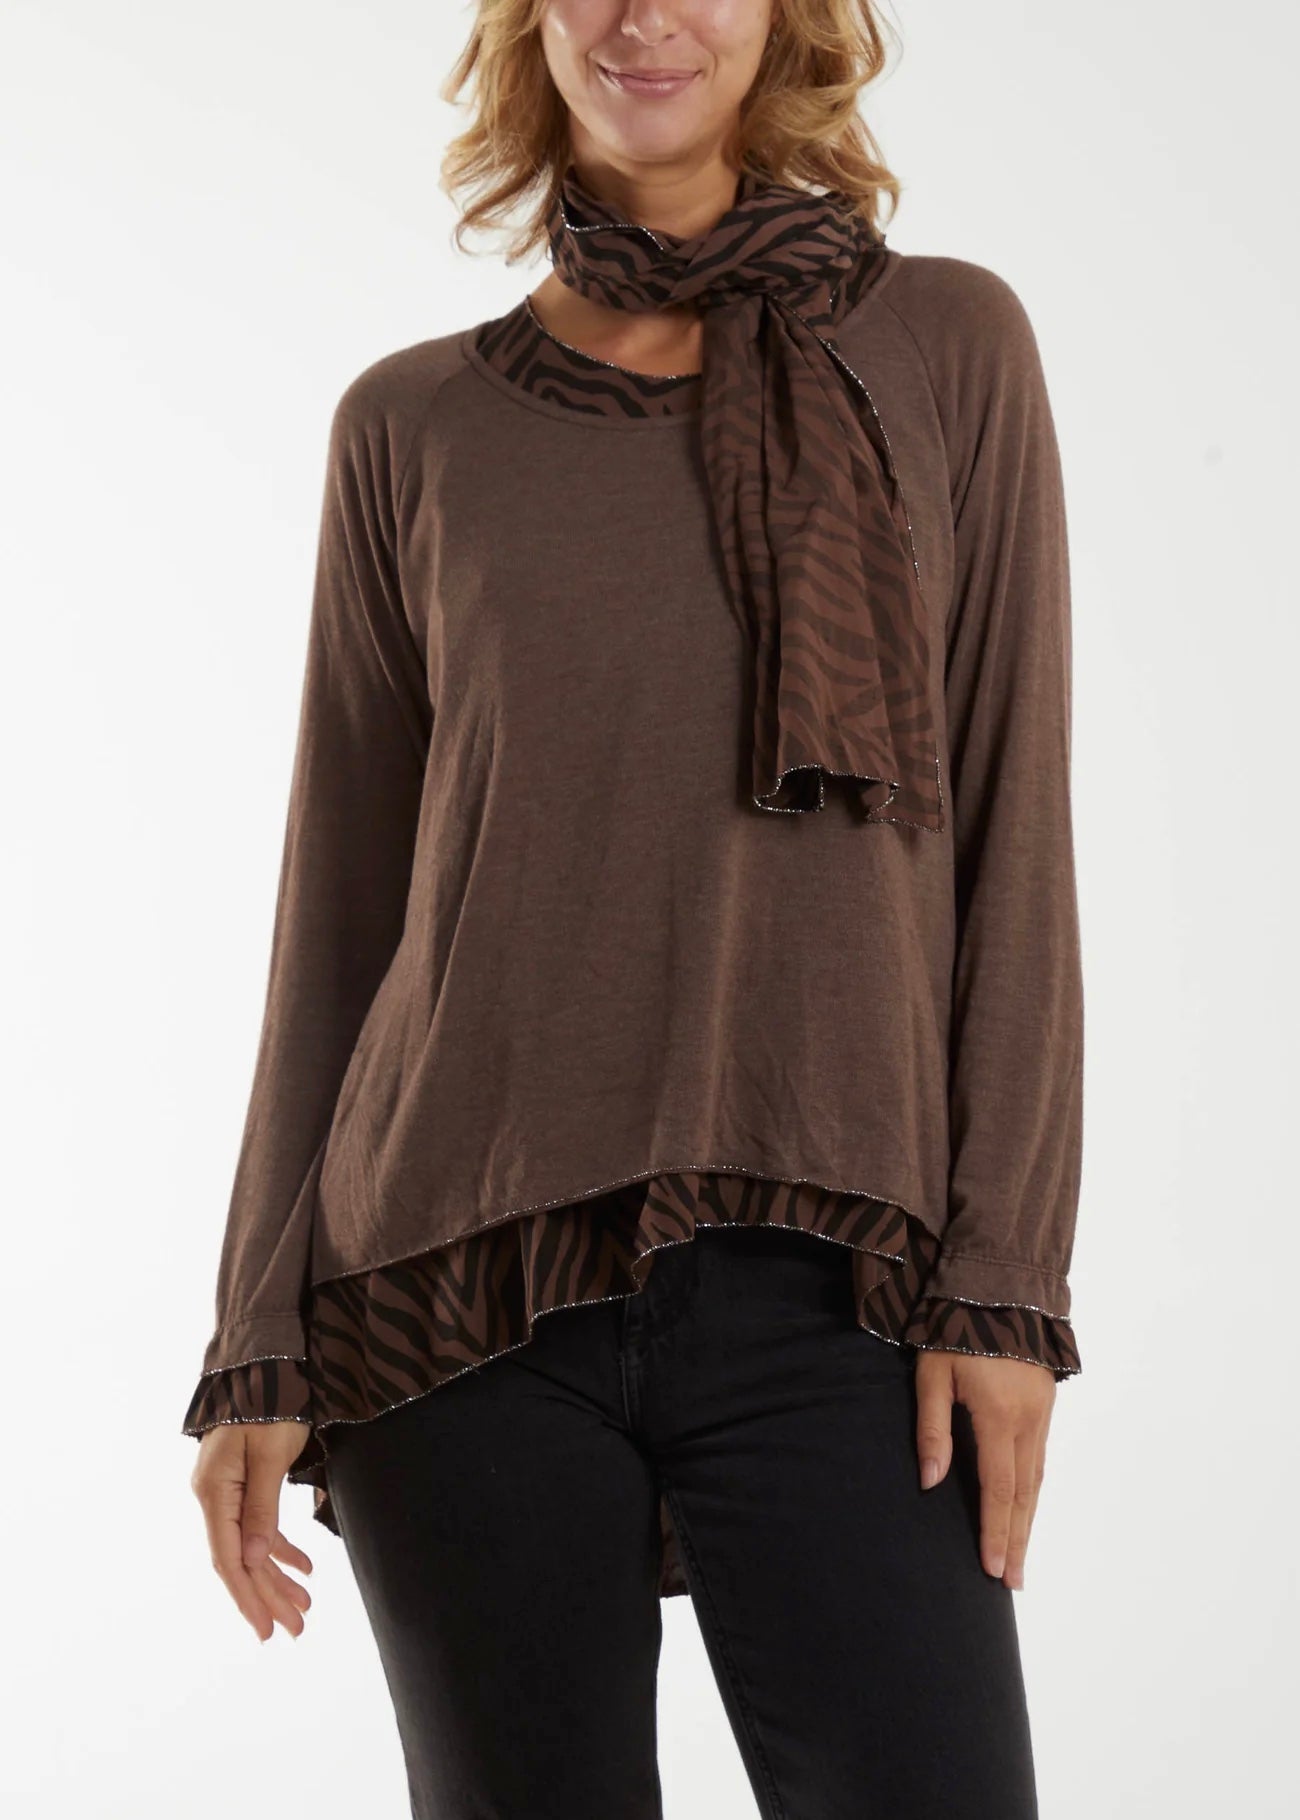 Sands - Double Layer Animal Print top with Scarf / Chocolate